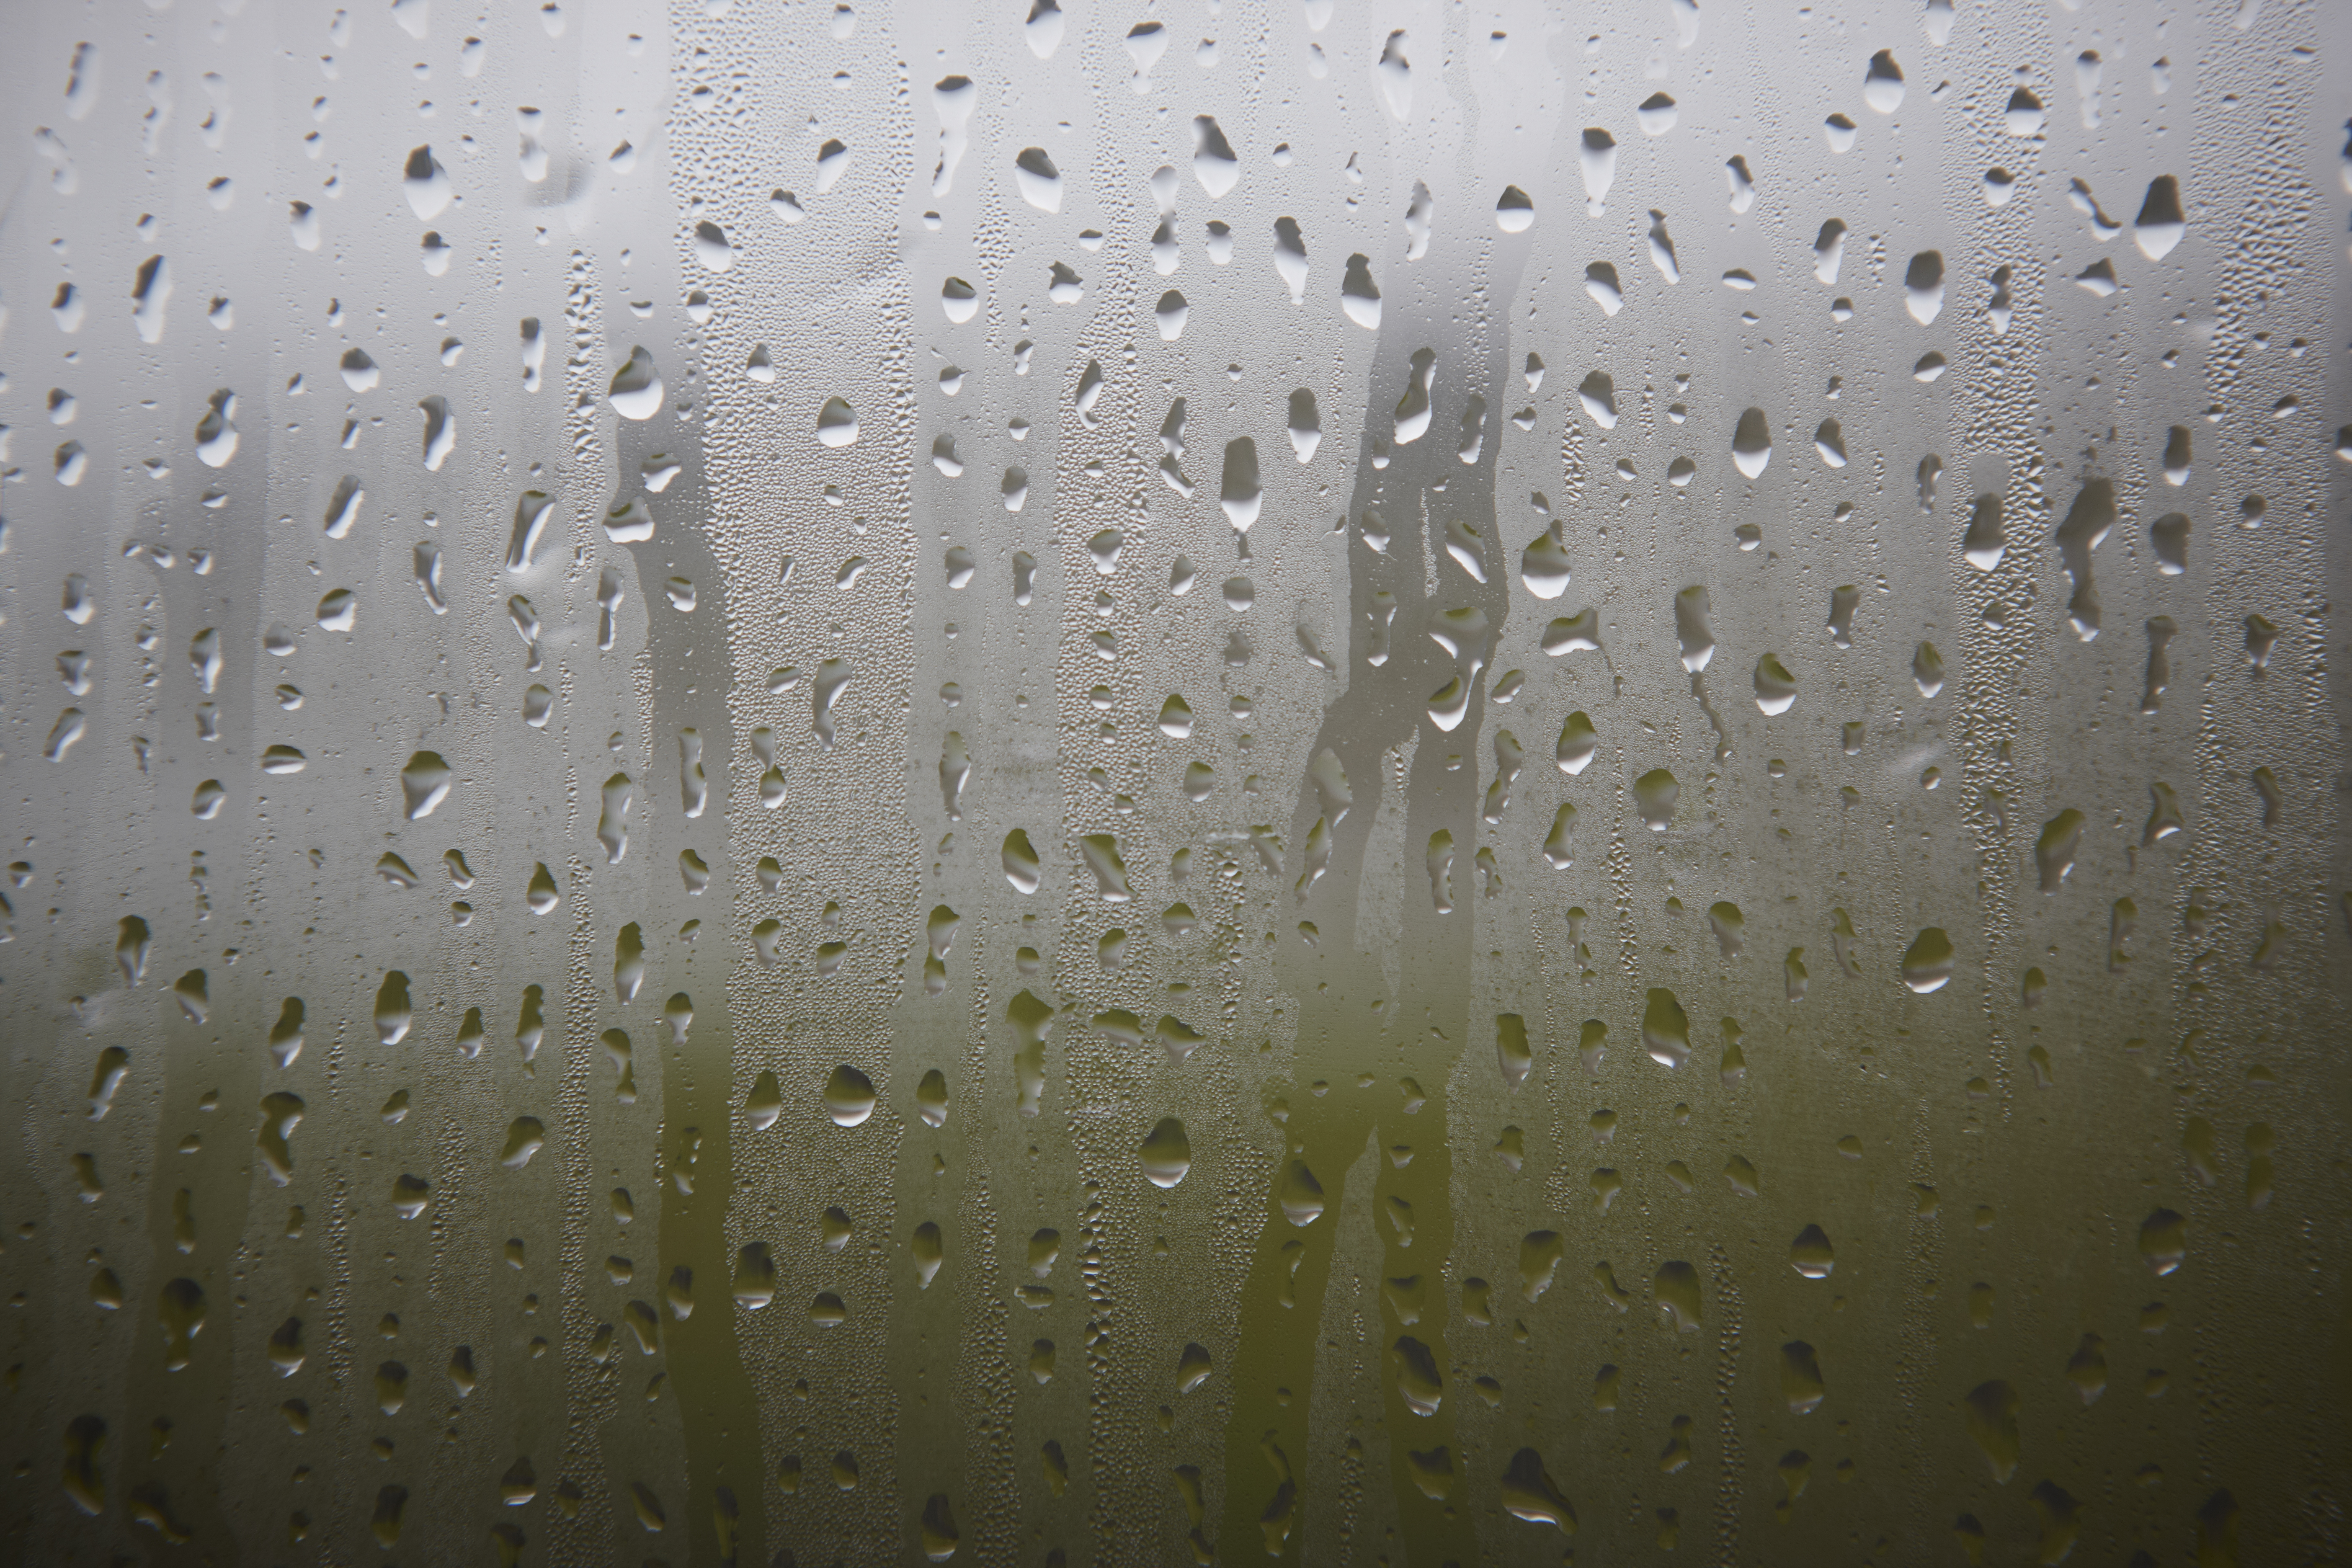 Window Condensation Signals an Indoor Air Quality Concern